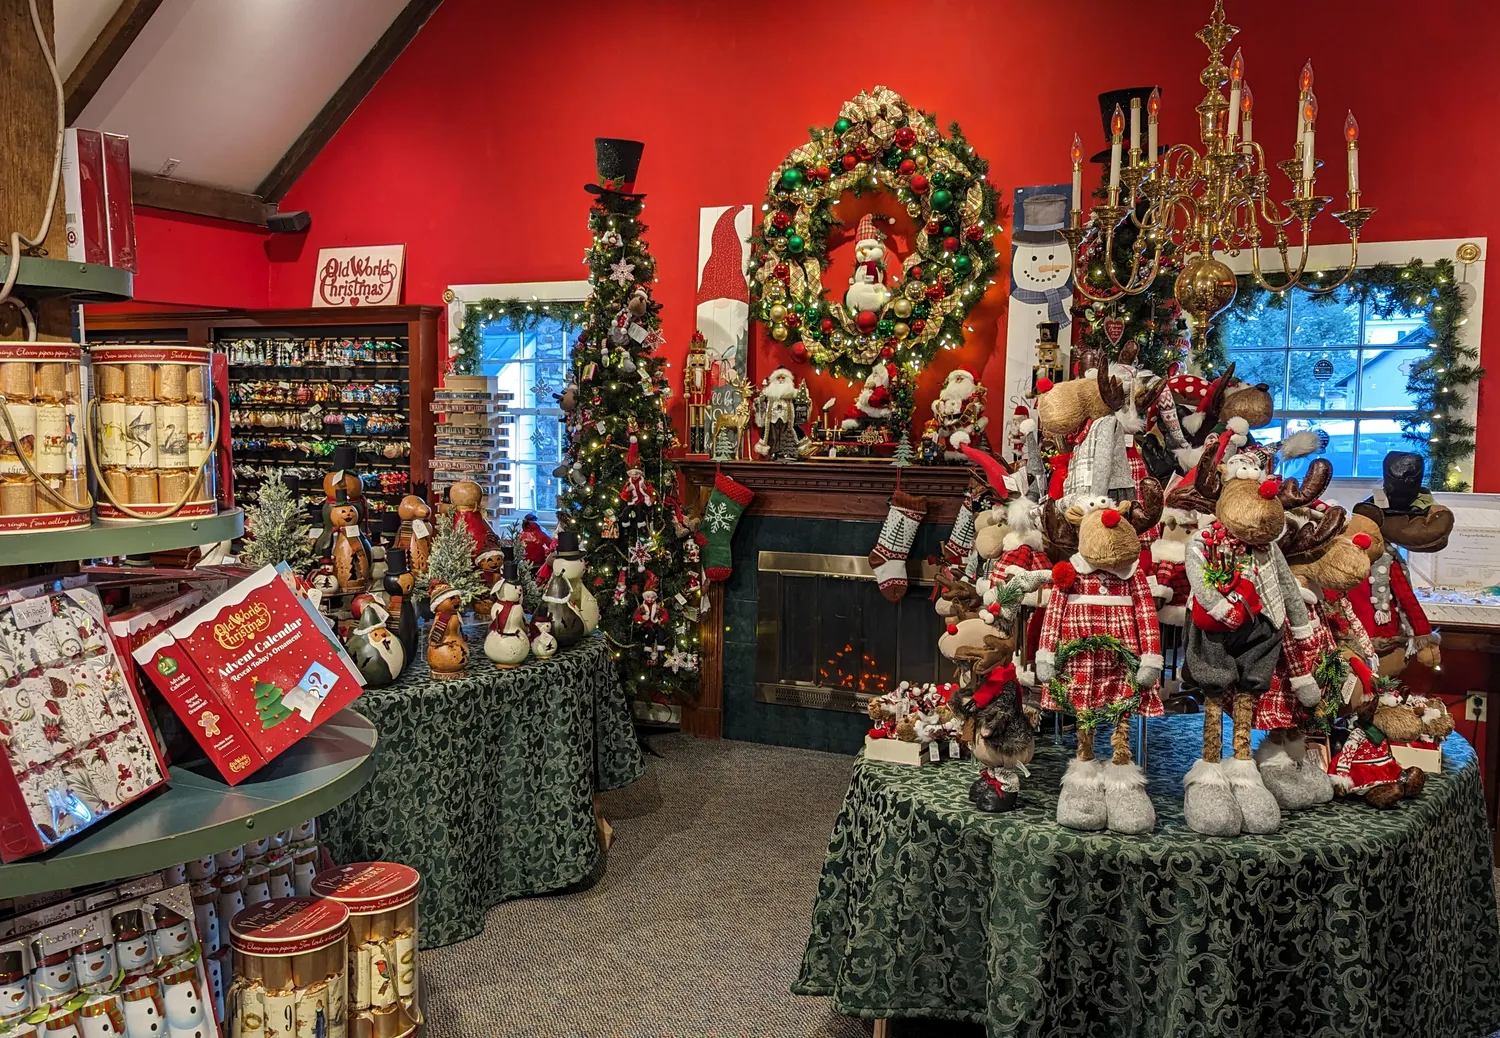 A festive holiday display at Pine Wreath Candle in Peddler's Village. Several tables and shelves adorned with Christmas decor.